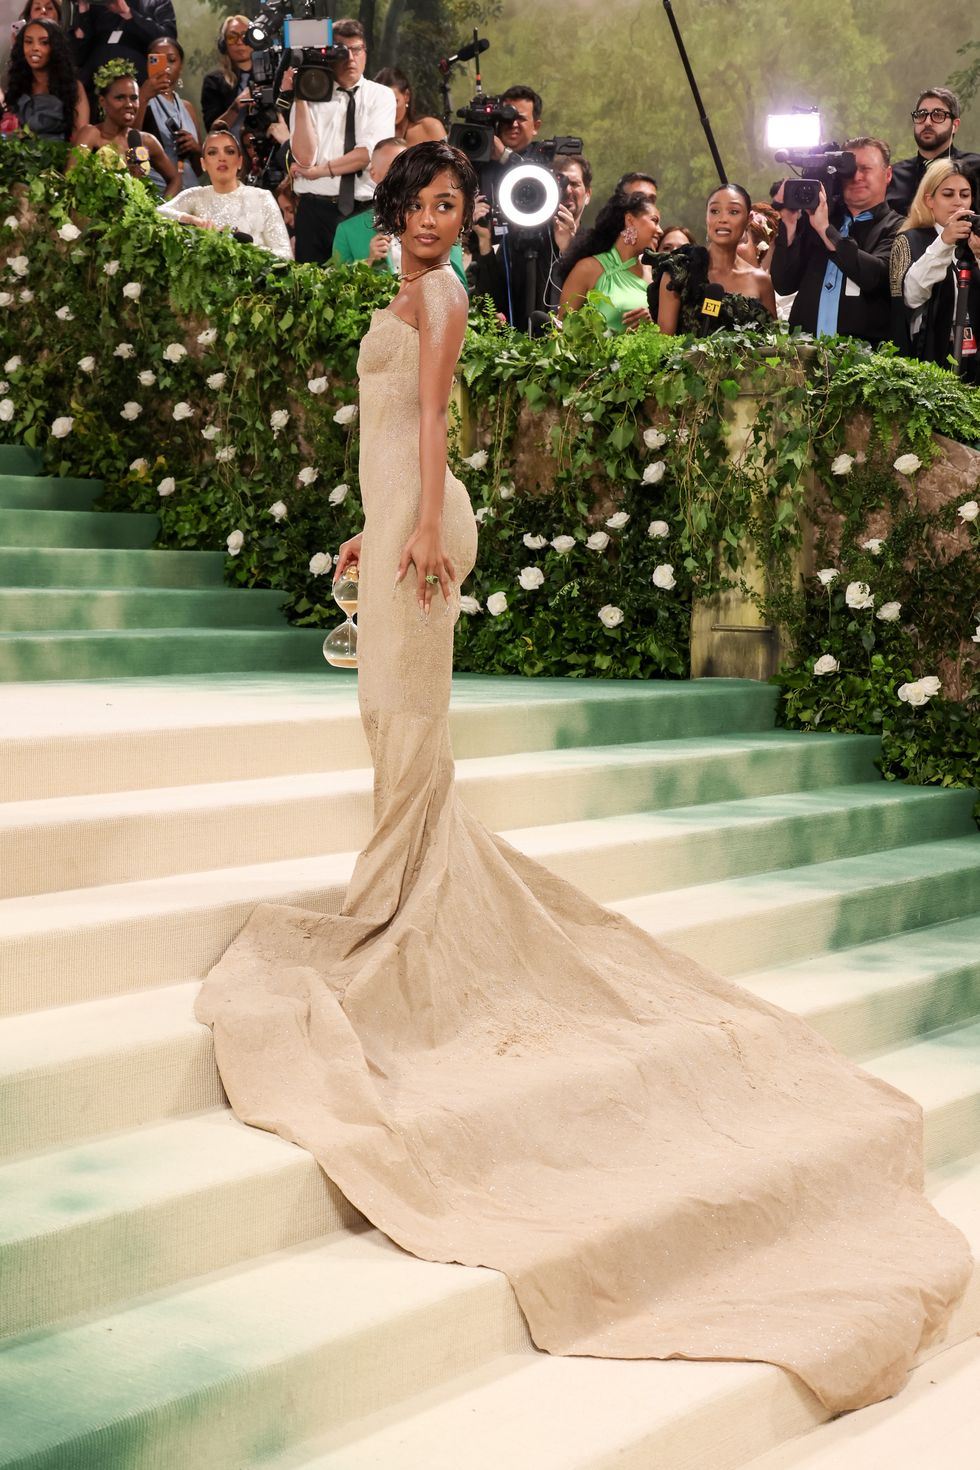 Tyla Makes Her Met Gala Debut in a Full Body-Cast Gown and New Bob Haircut